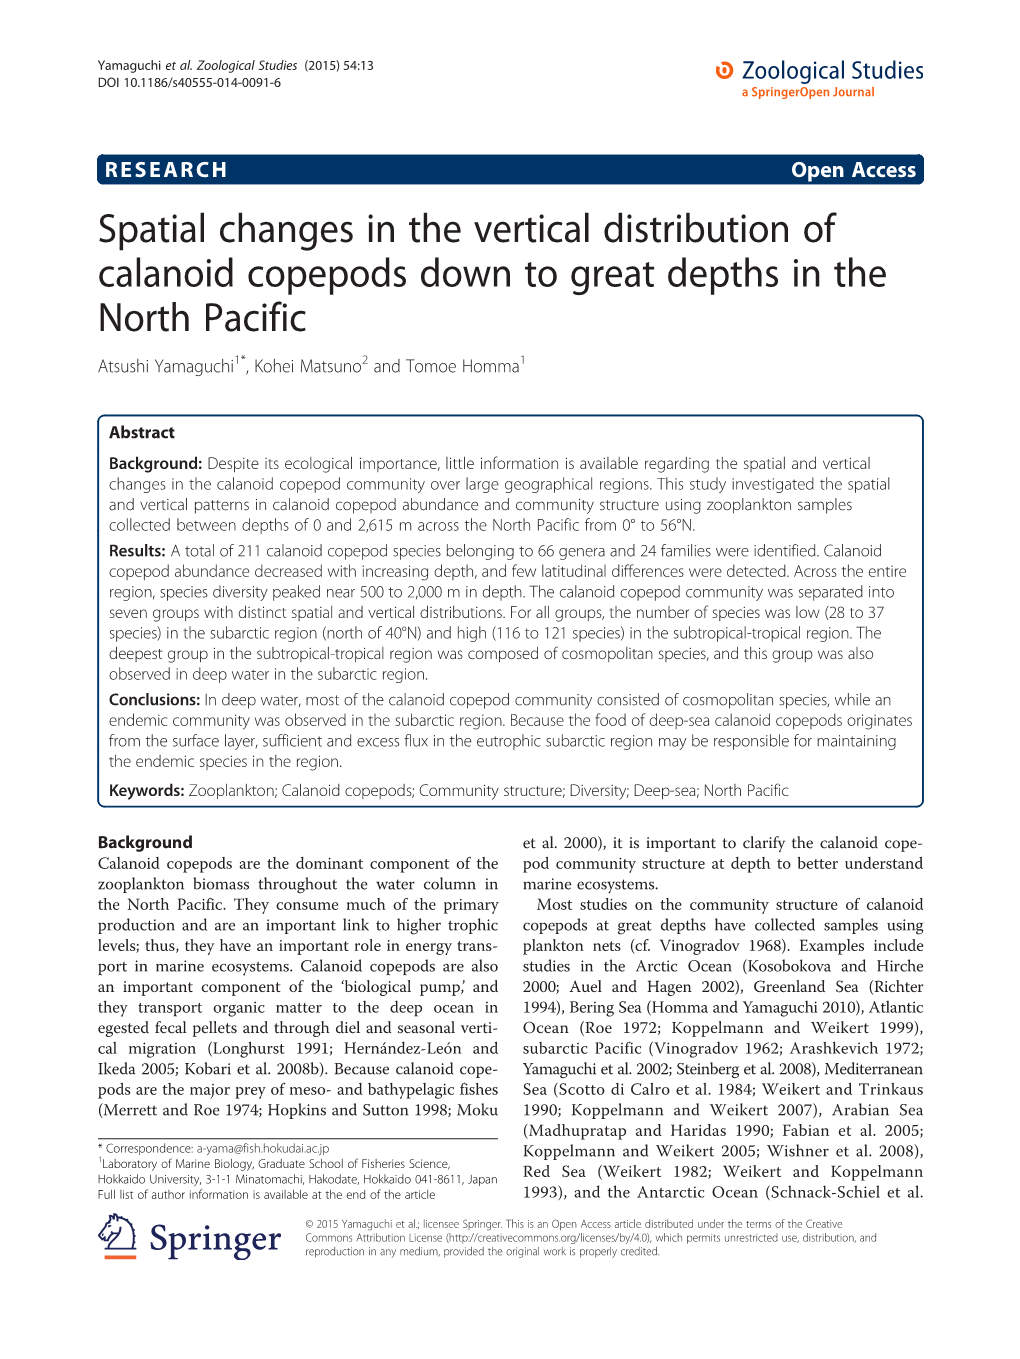 Spatial Changes in the Vertical Distribution of Calanoid Copepods Down to Great Depths in the North Pacific Atsushi Yamaguchi1*, Kohei Matsuno2 and Tomoe Homma1